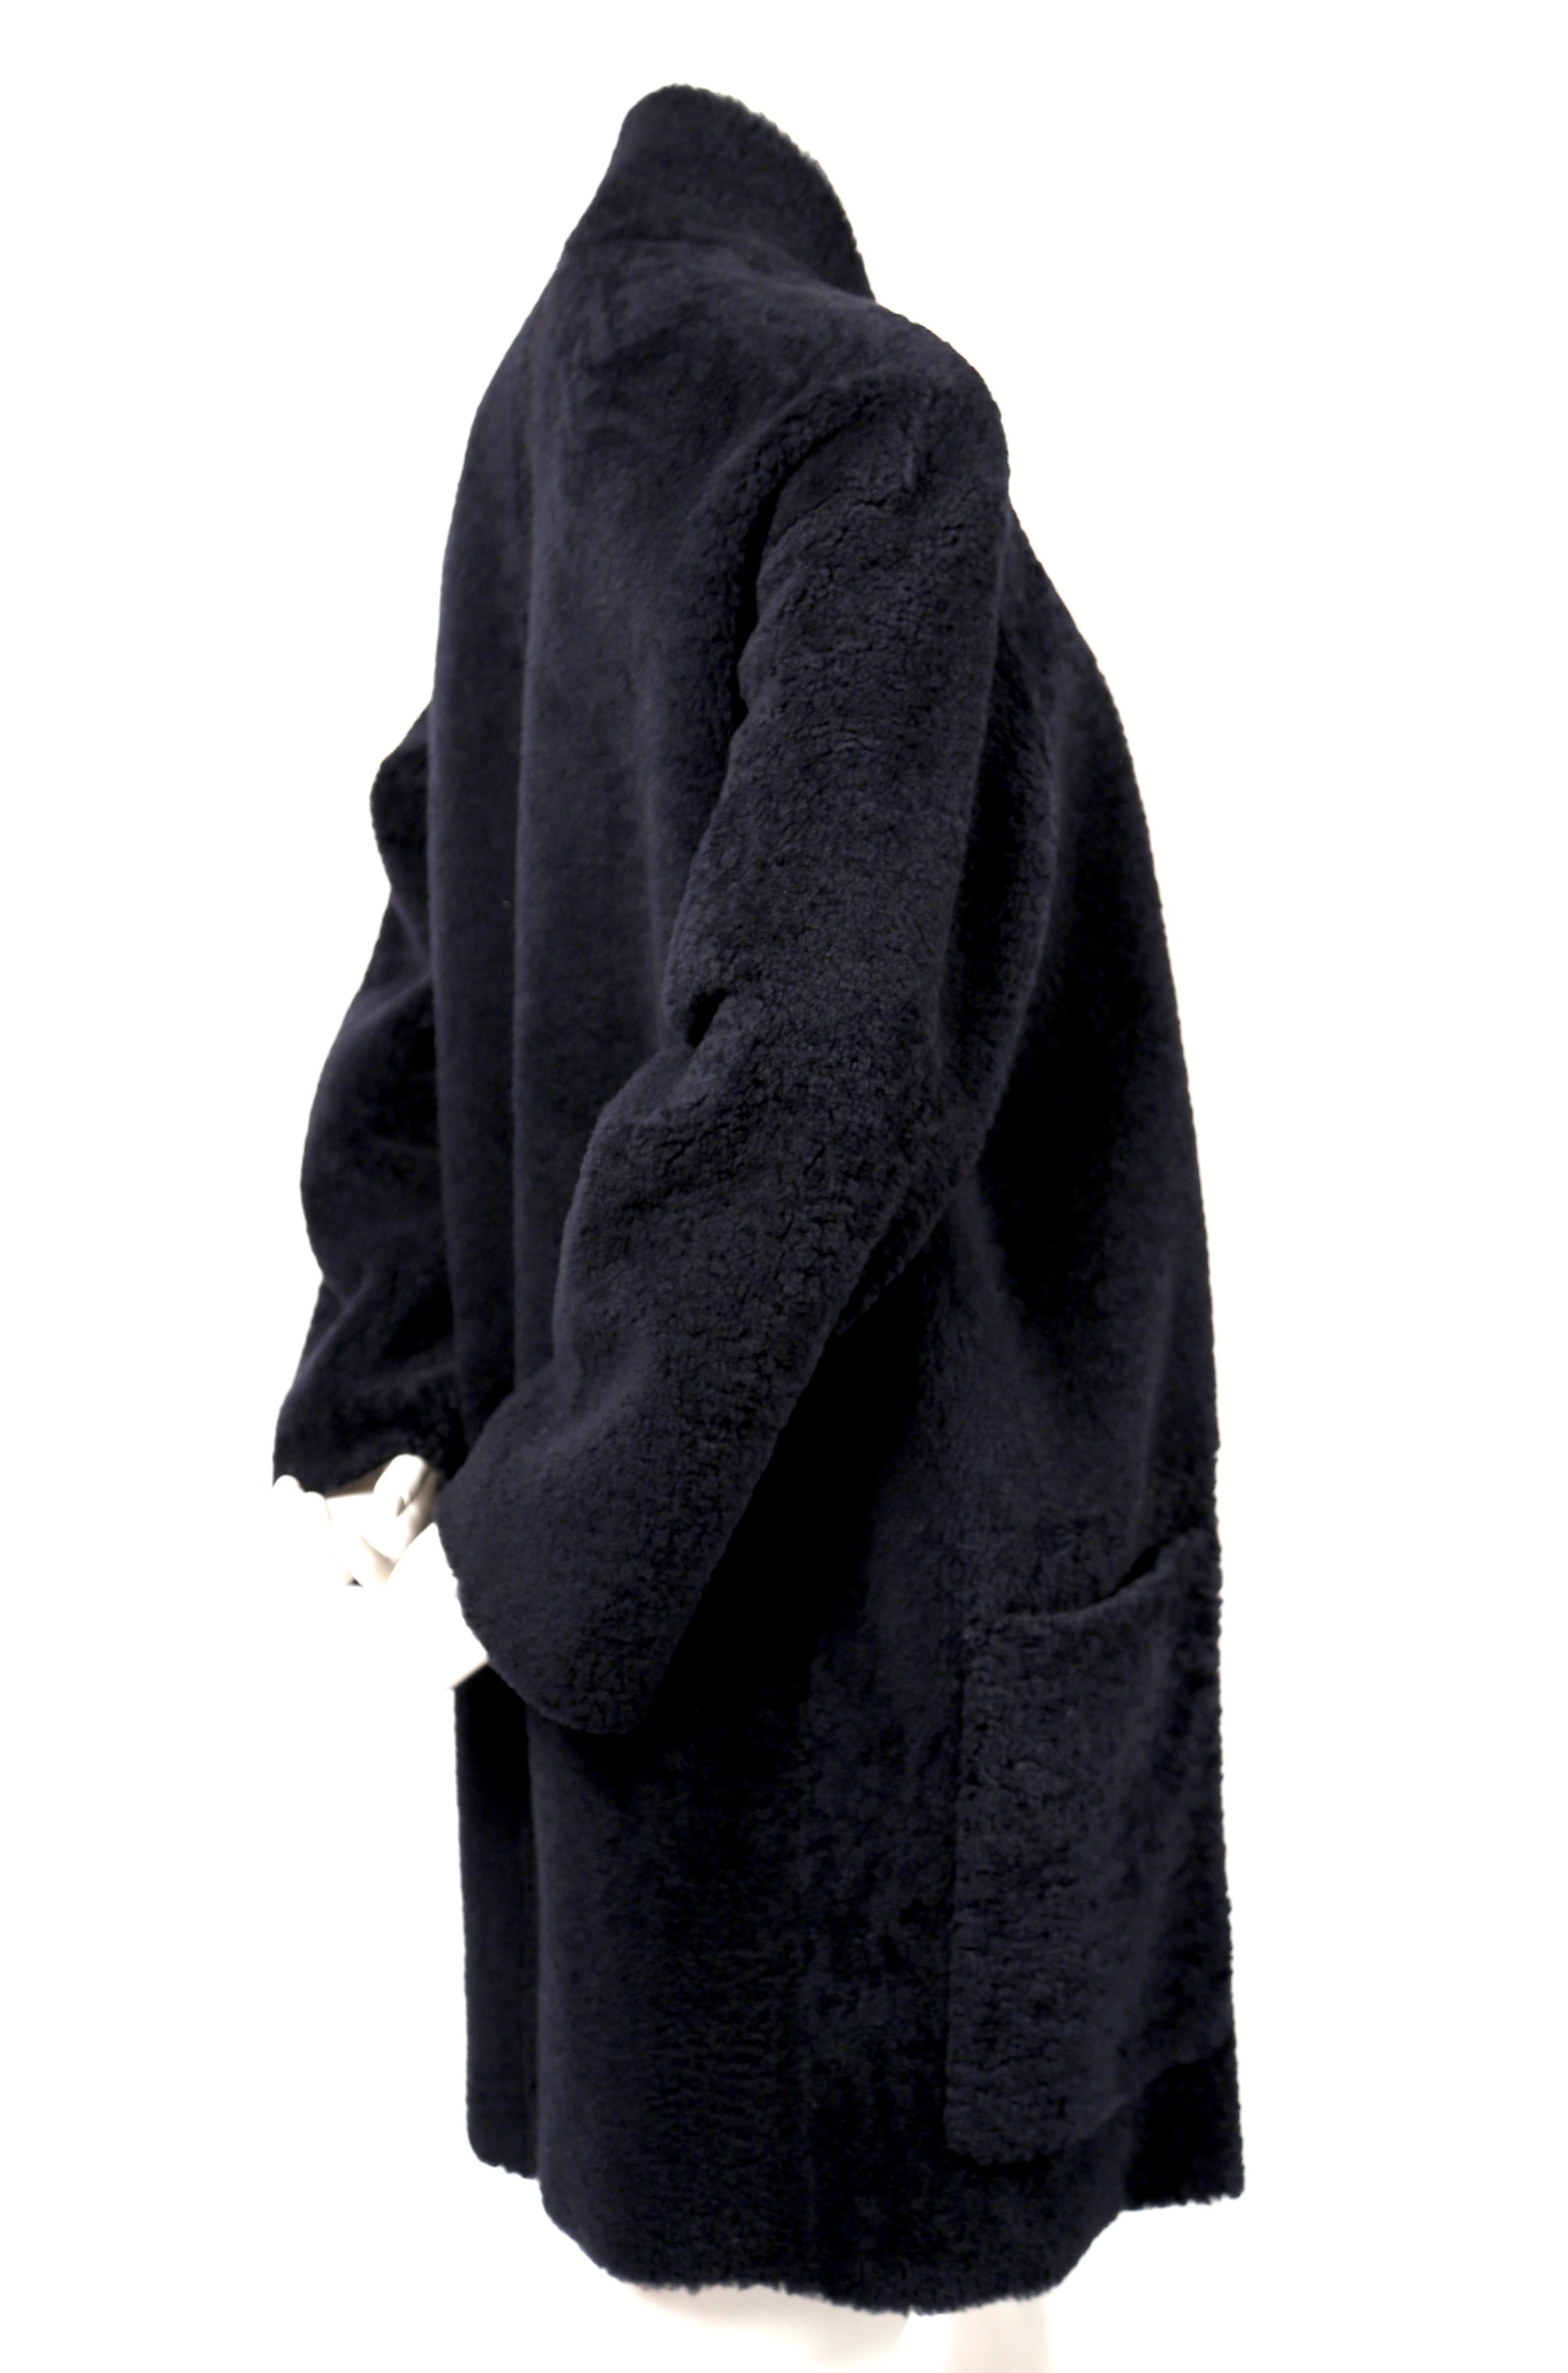 Deep, navy blue shearling coat with open closure designed by Phoebe Philo for Celine. French size 36. Approximate measurements: drop shoulder 21